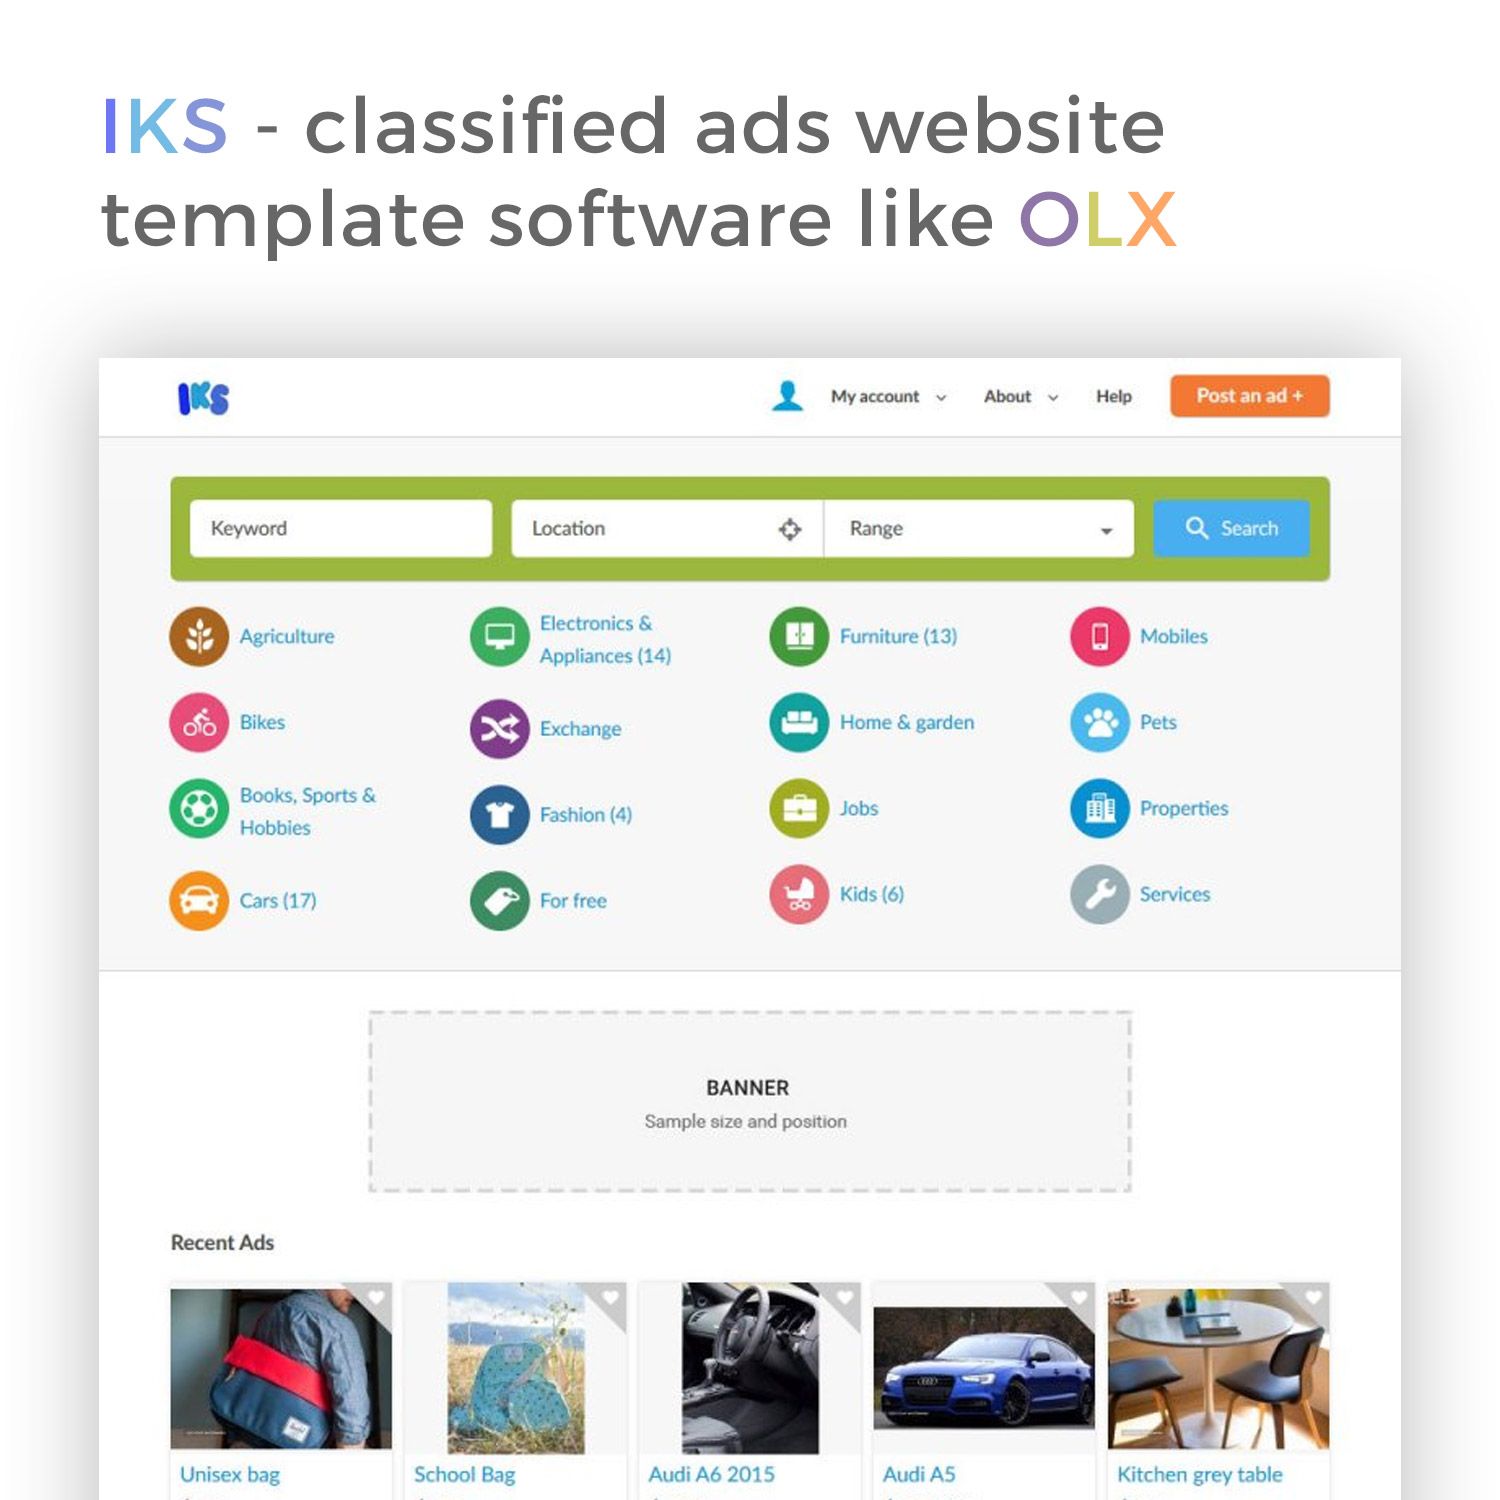 Classified ads website inspired by OLX